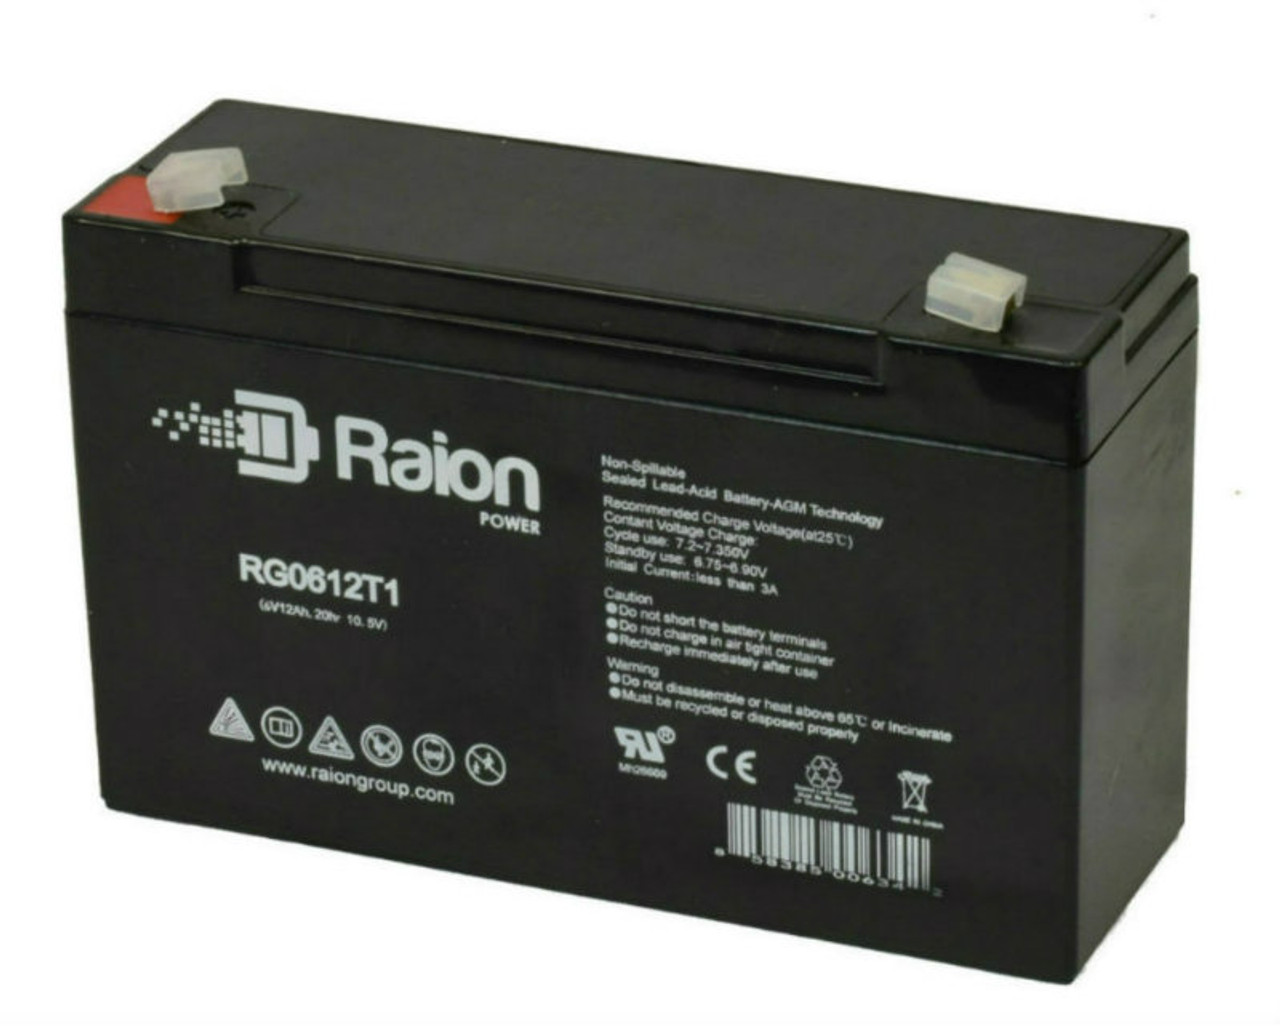 Raion Power RG06120T1 6V 12Ah Replacement UPS Battery Cartridge for ONEAC ON900A-SN